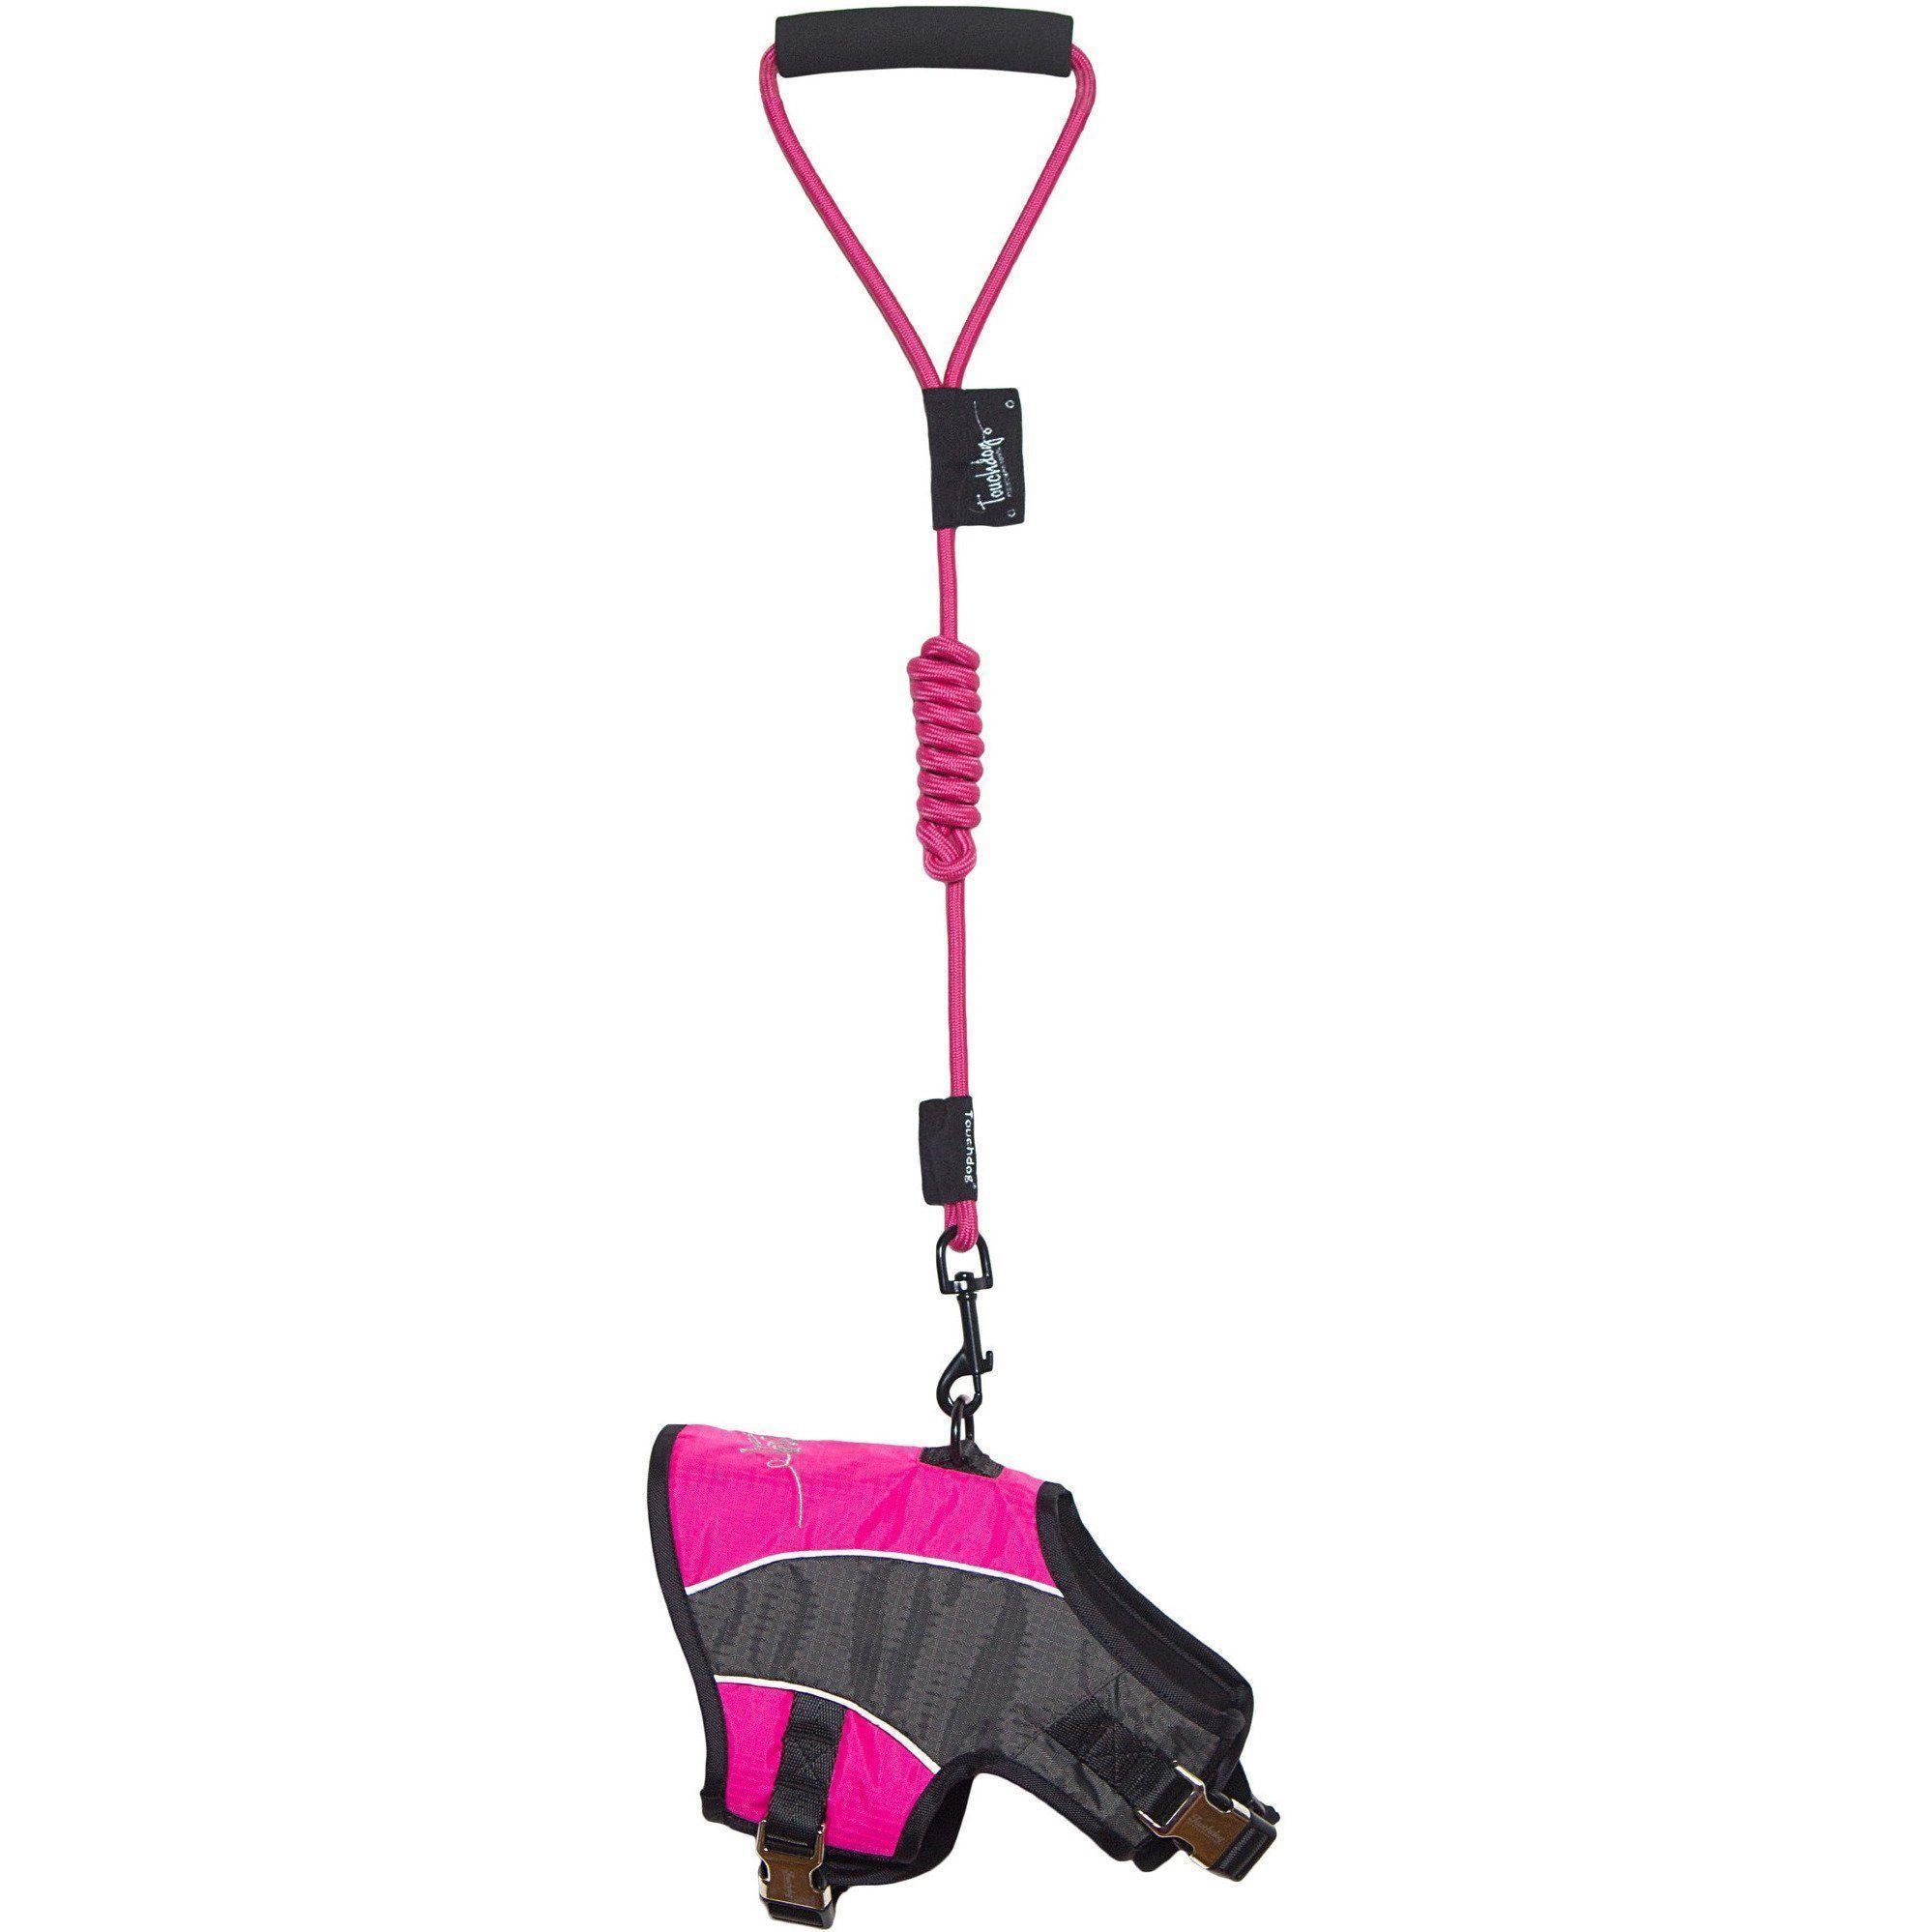 Touchdog ® 'Reflective-Max' 2-in-1 Performance Dog Harness and Leash X-Small Pink, Charcoal Grey